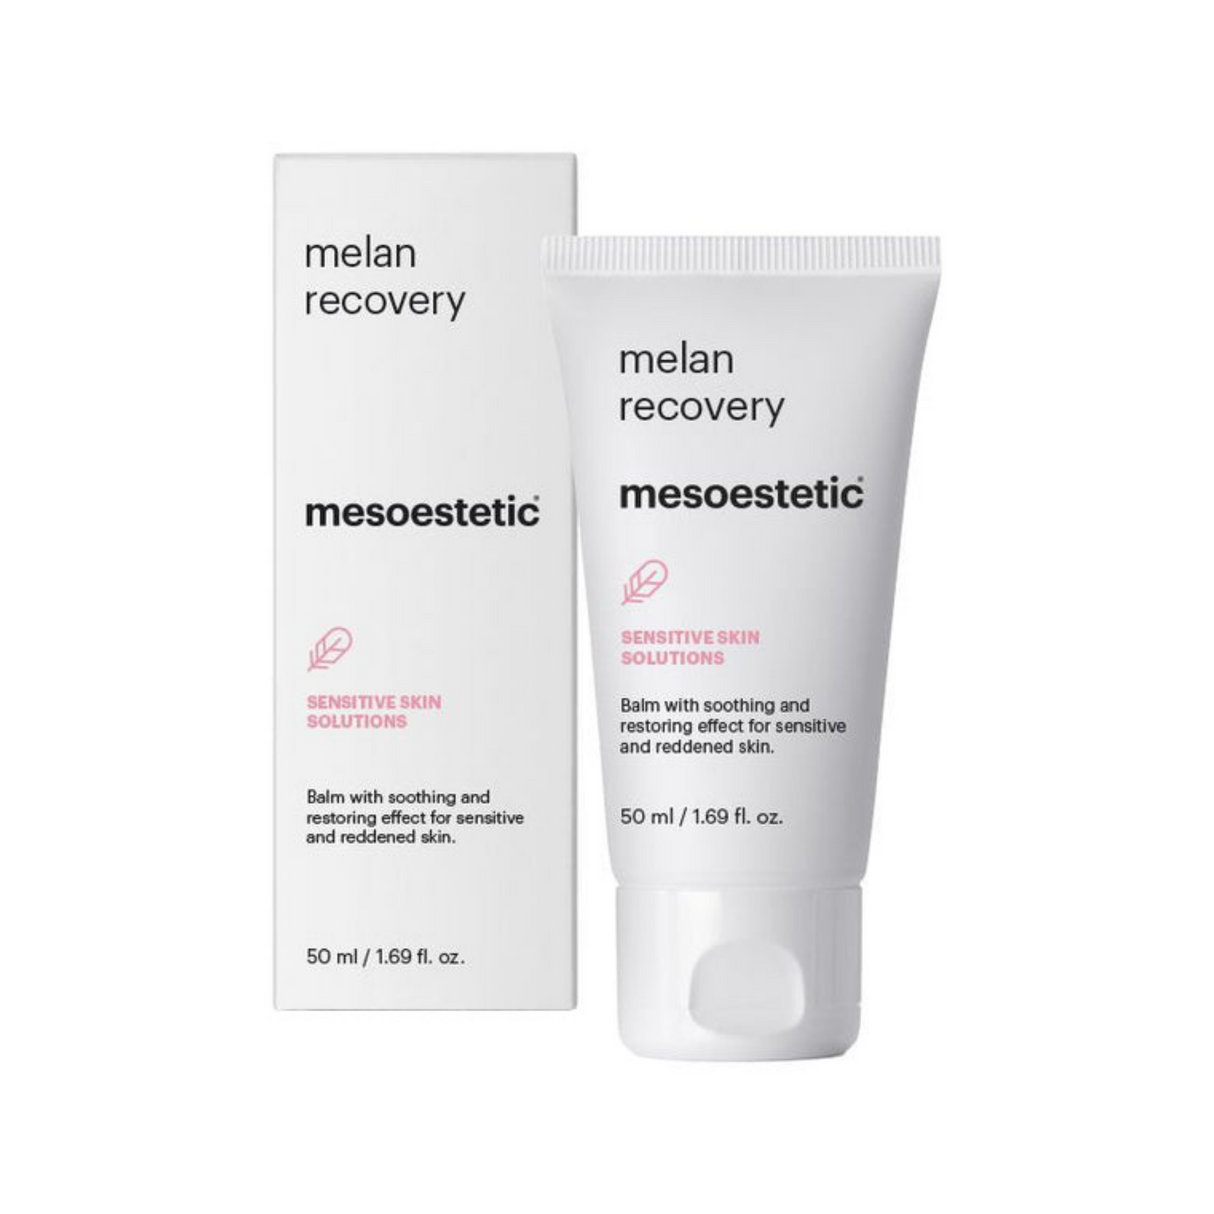 melan recovery soothing and regenerating balm, 50 ml